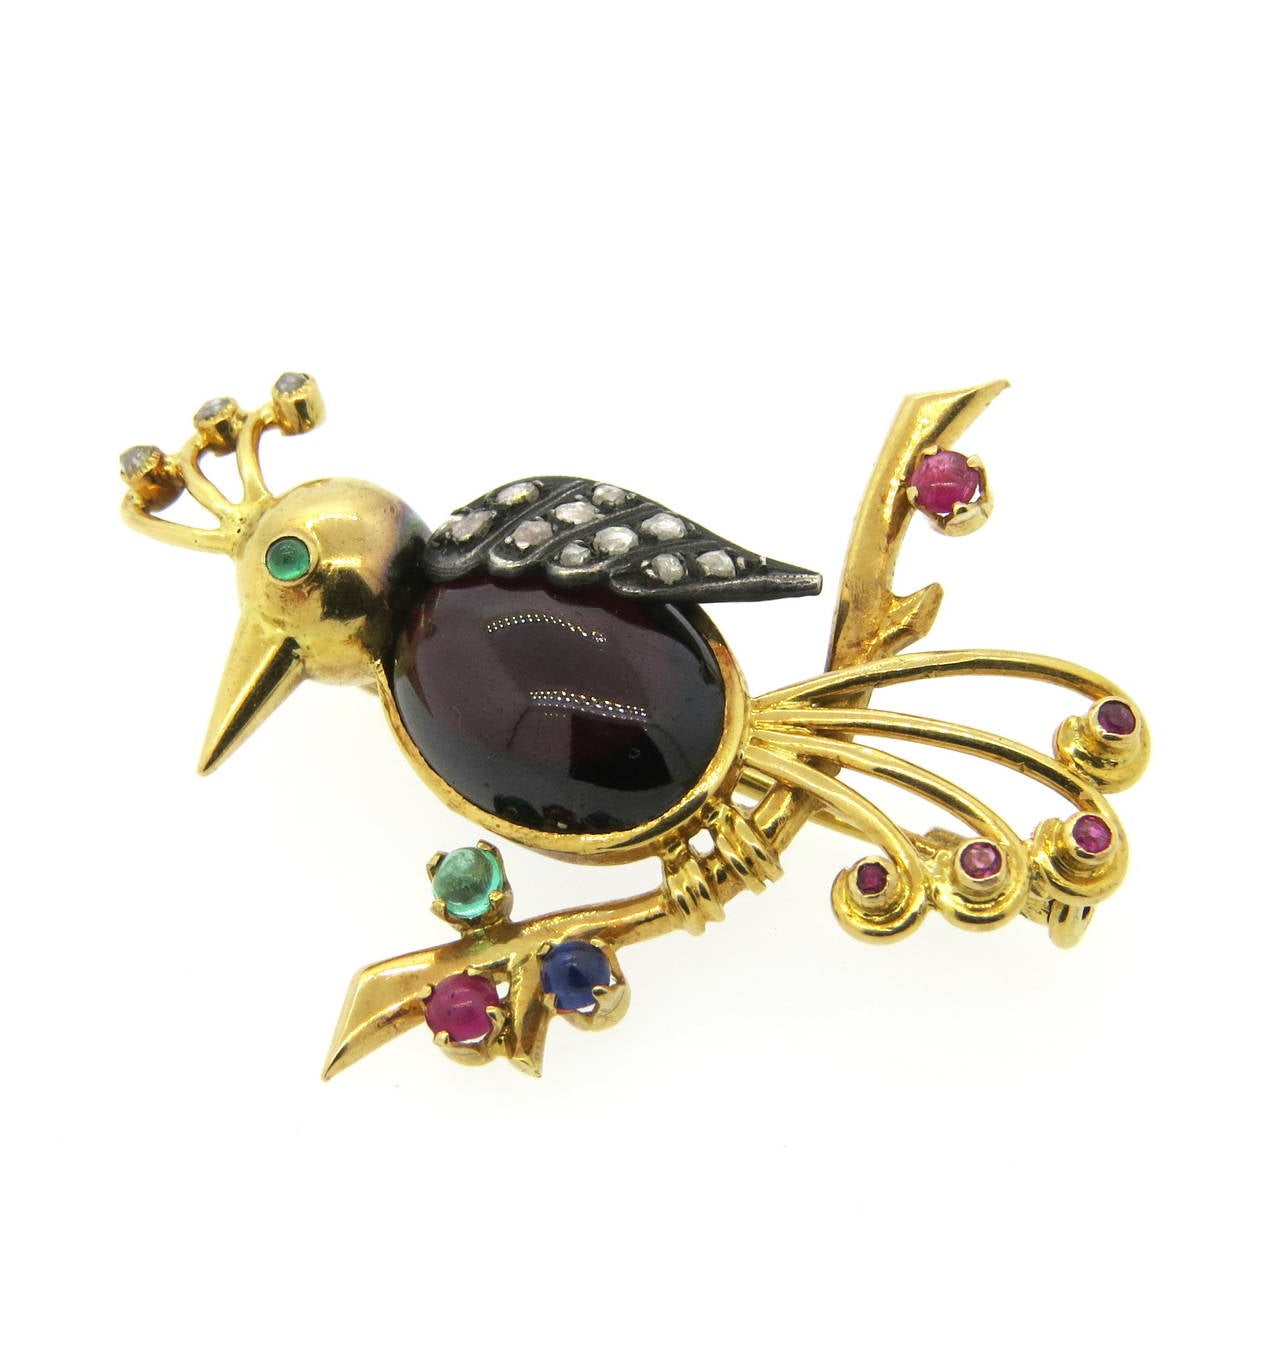 Antique Continental 18k gold bird brooch, decorated with 14.5mm x 11mm garnet cabochon, rubies, emeralds, sapphires and rose cut diamonds set in silver. Brooch measures 46mm x 40mm. Weight of the piece - 12.4 grams